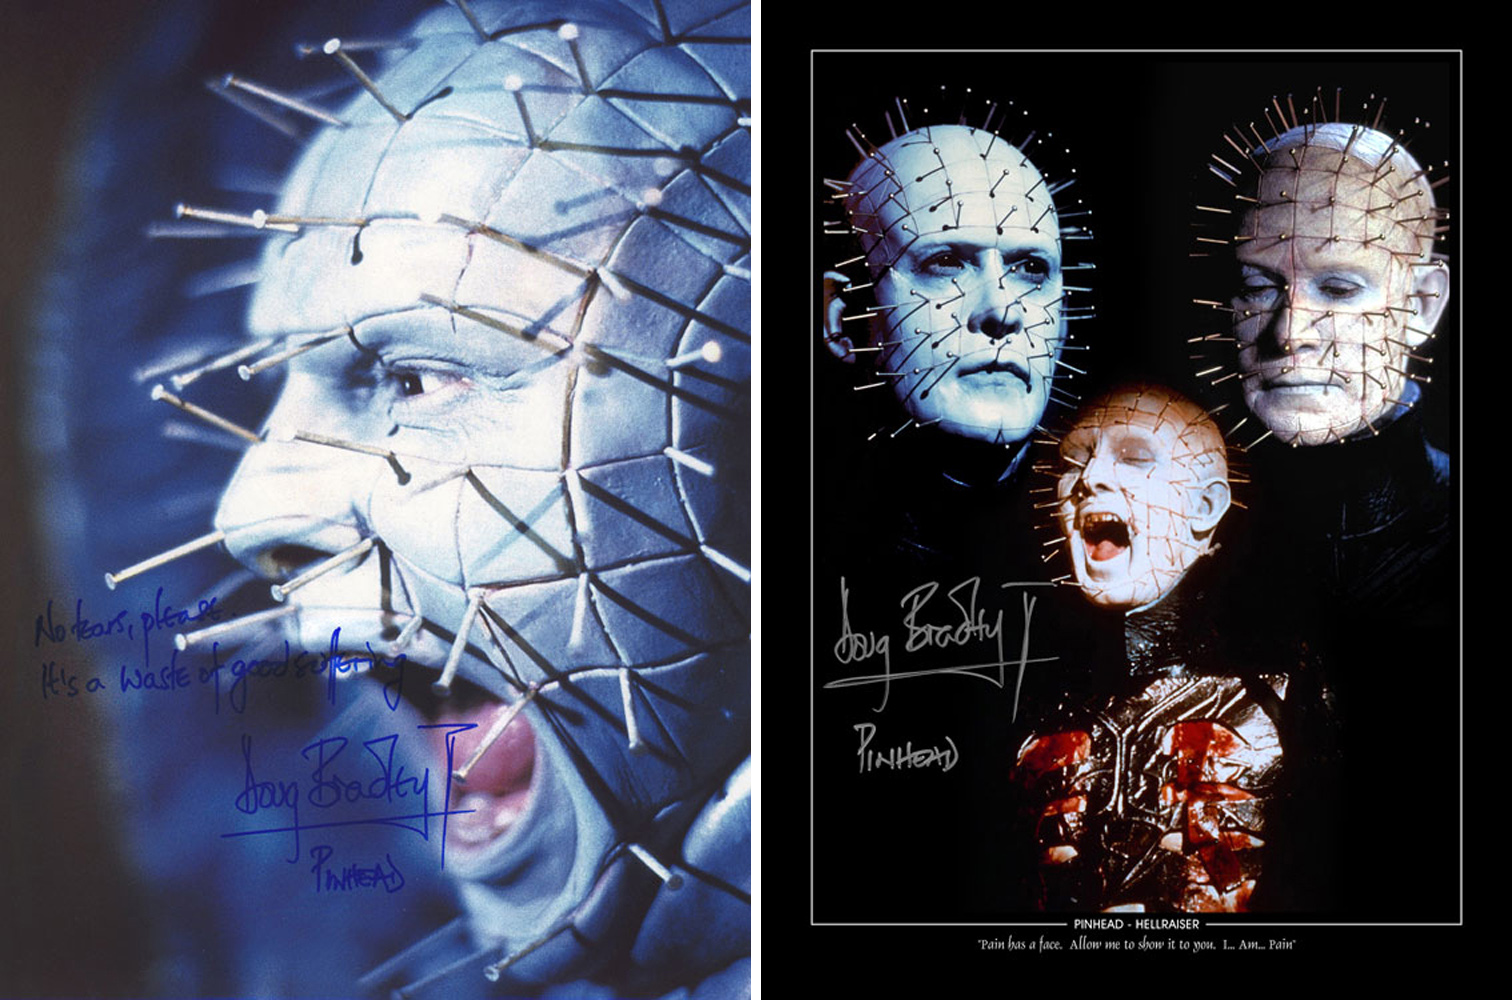 SALE! Lot of 2 Hellraiser Pinhead hand signed 16x12 photos. This is a beautiful lot of 2 hand signed